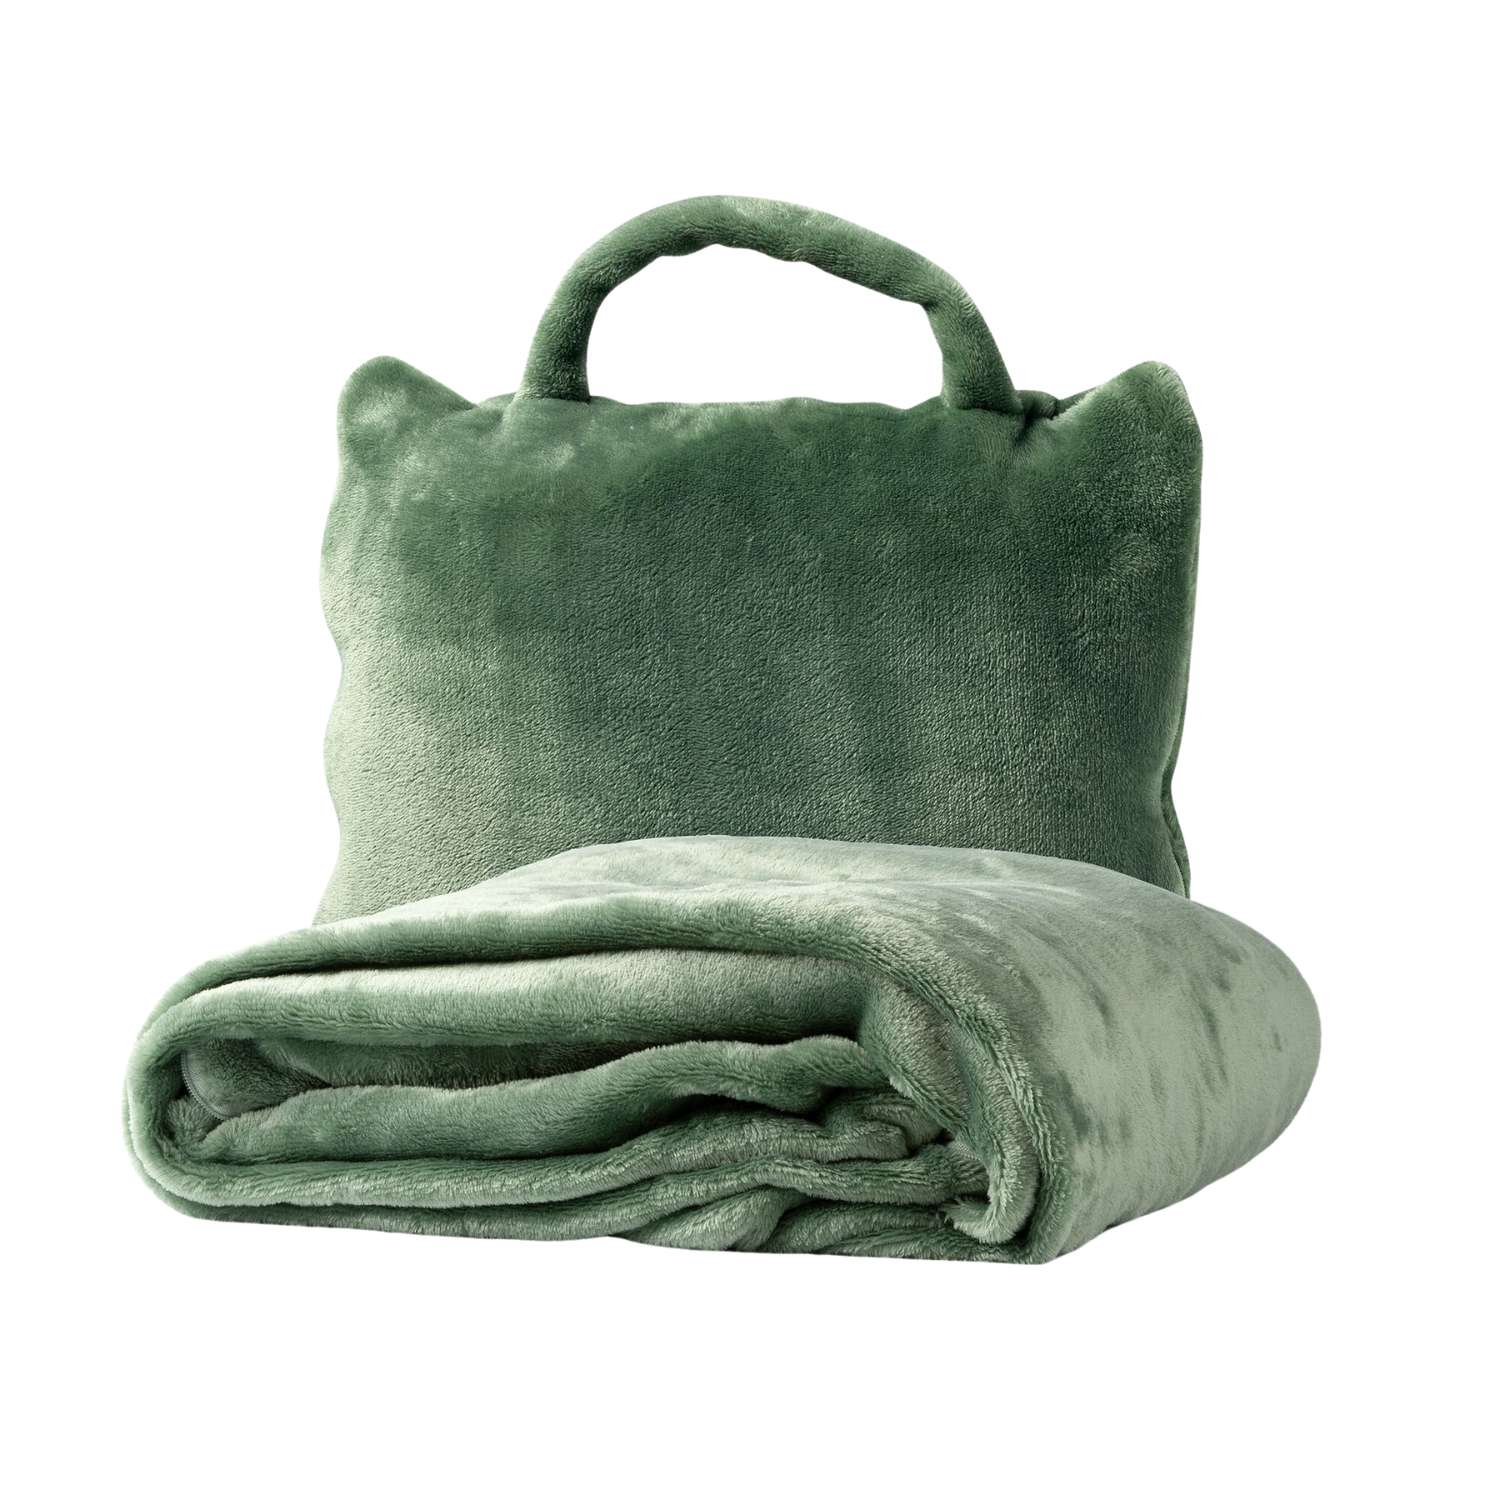 TESSA - Plaid to Go - 130x150 cm - Hedge Green - ideal for traveling - folds into handy bag